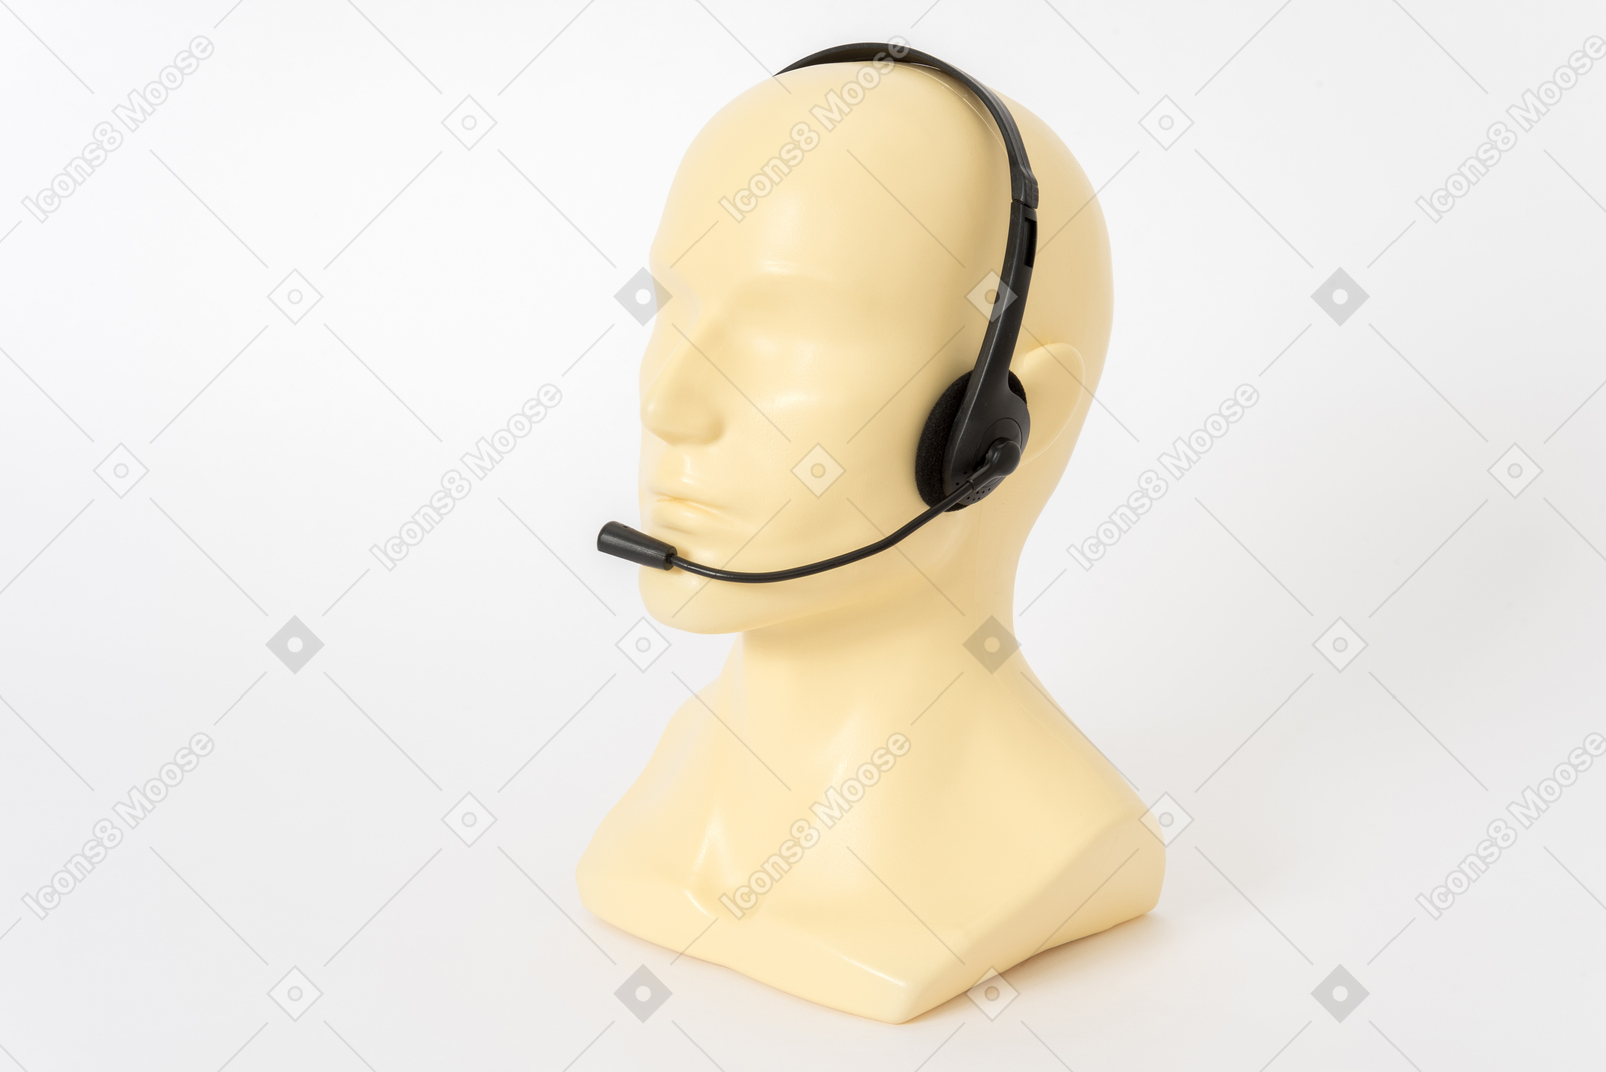 Call center on mannequin head